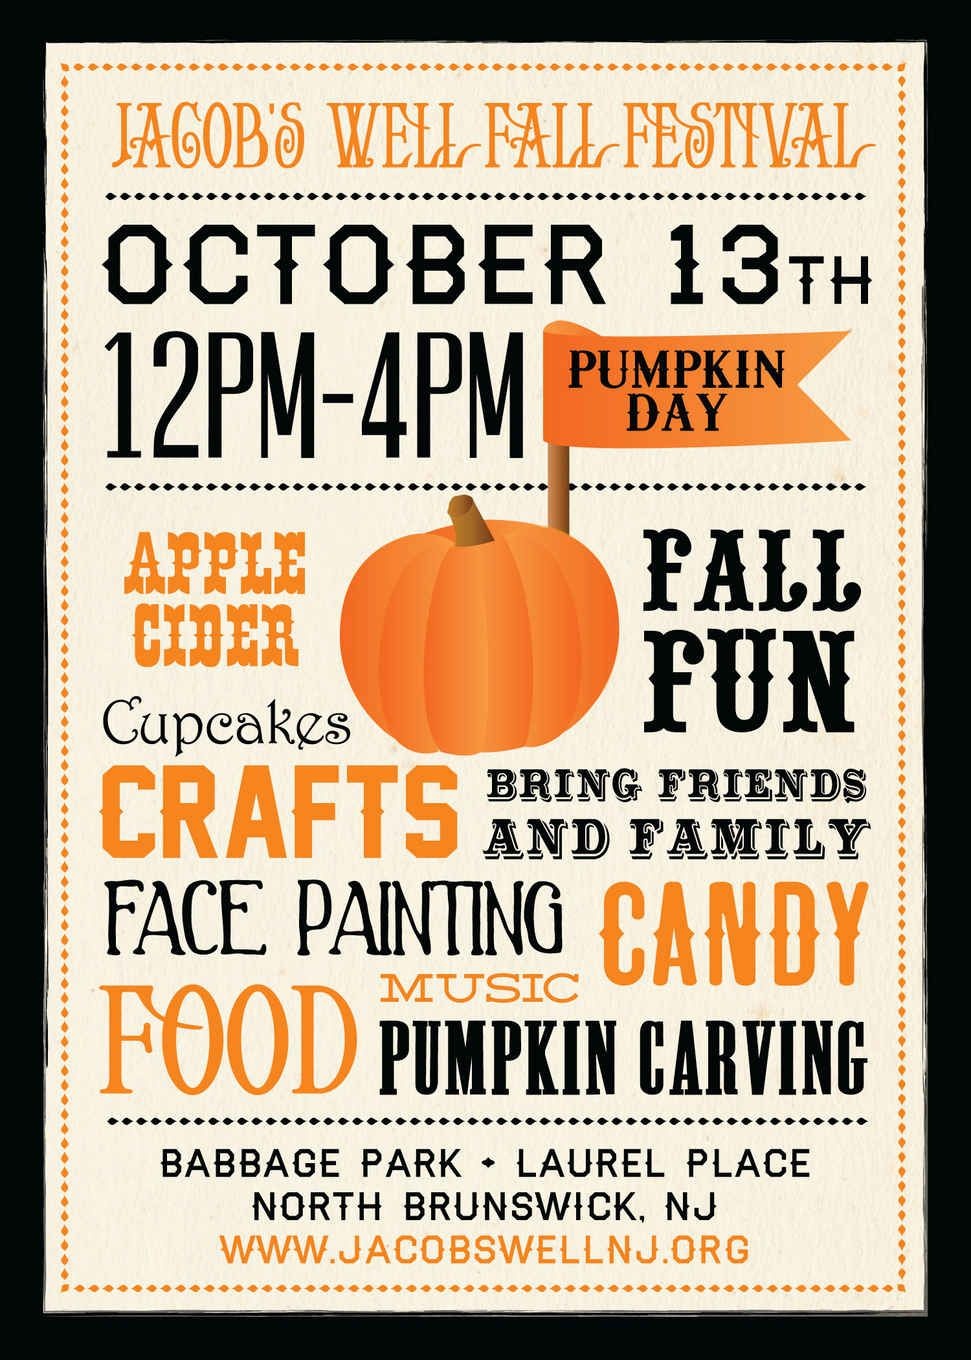 002 Fall Festival Flyers Templates Template Ideas Awful School Flyer